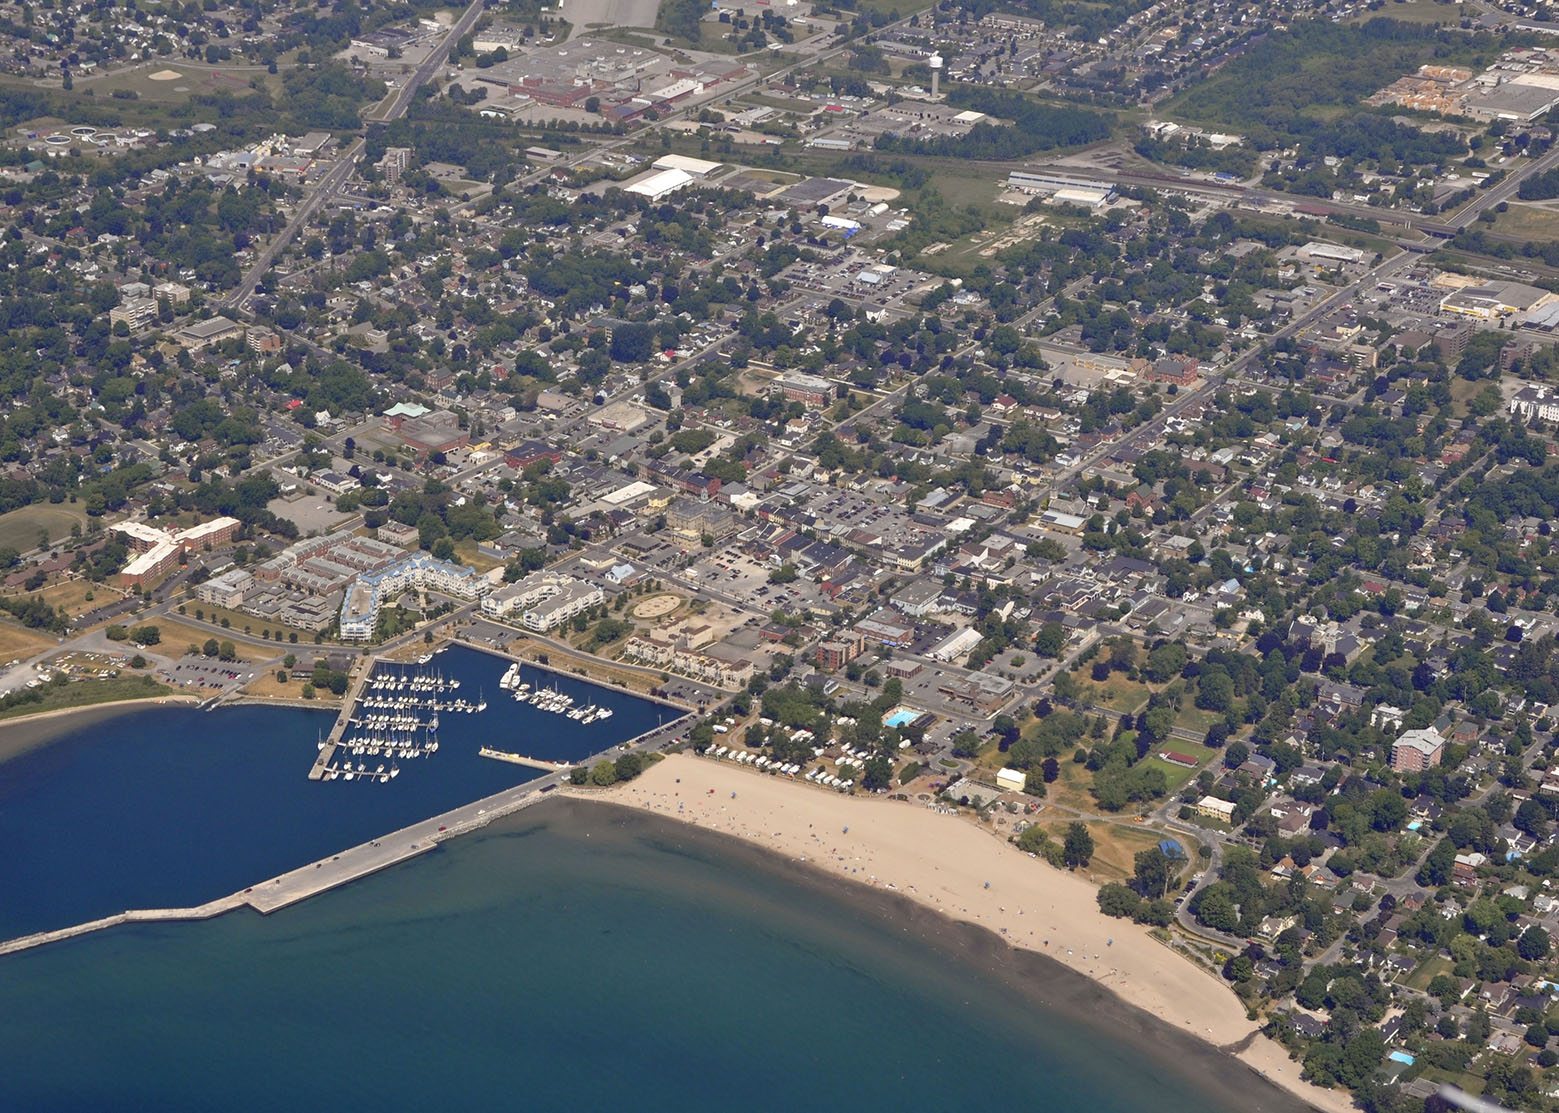 aerial view of city scape including beach and harbour area, Cobourg Ontario Canada